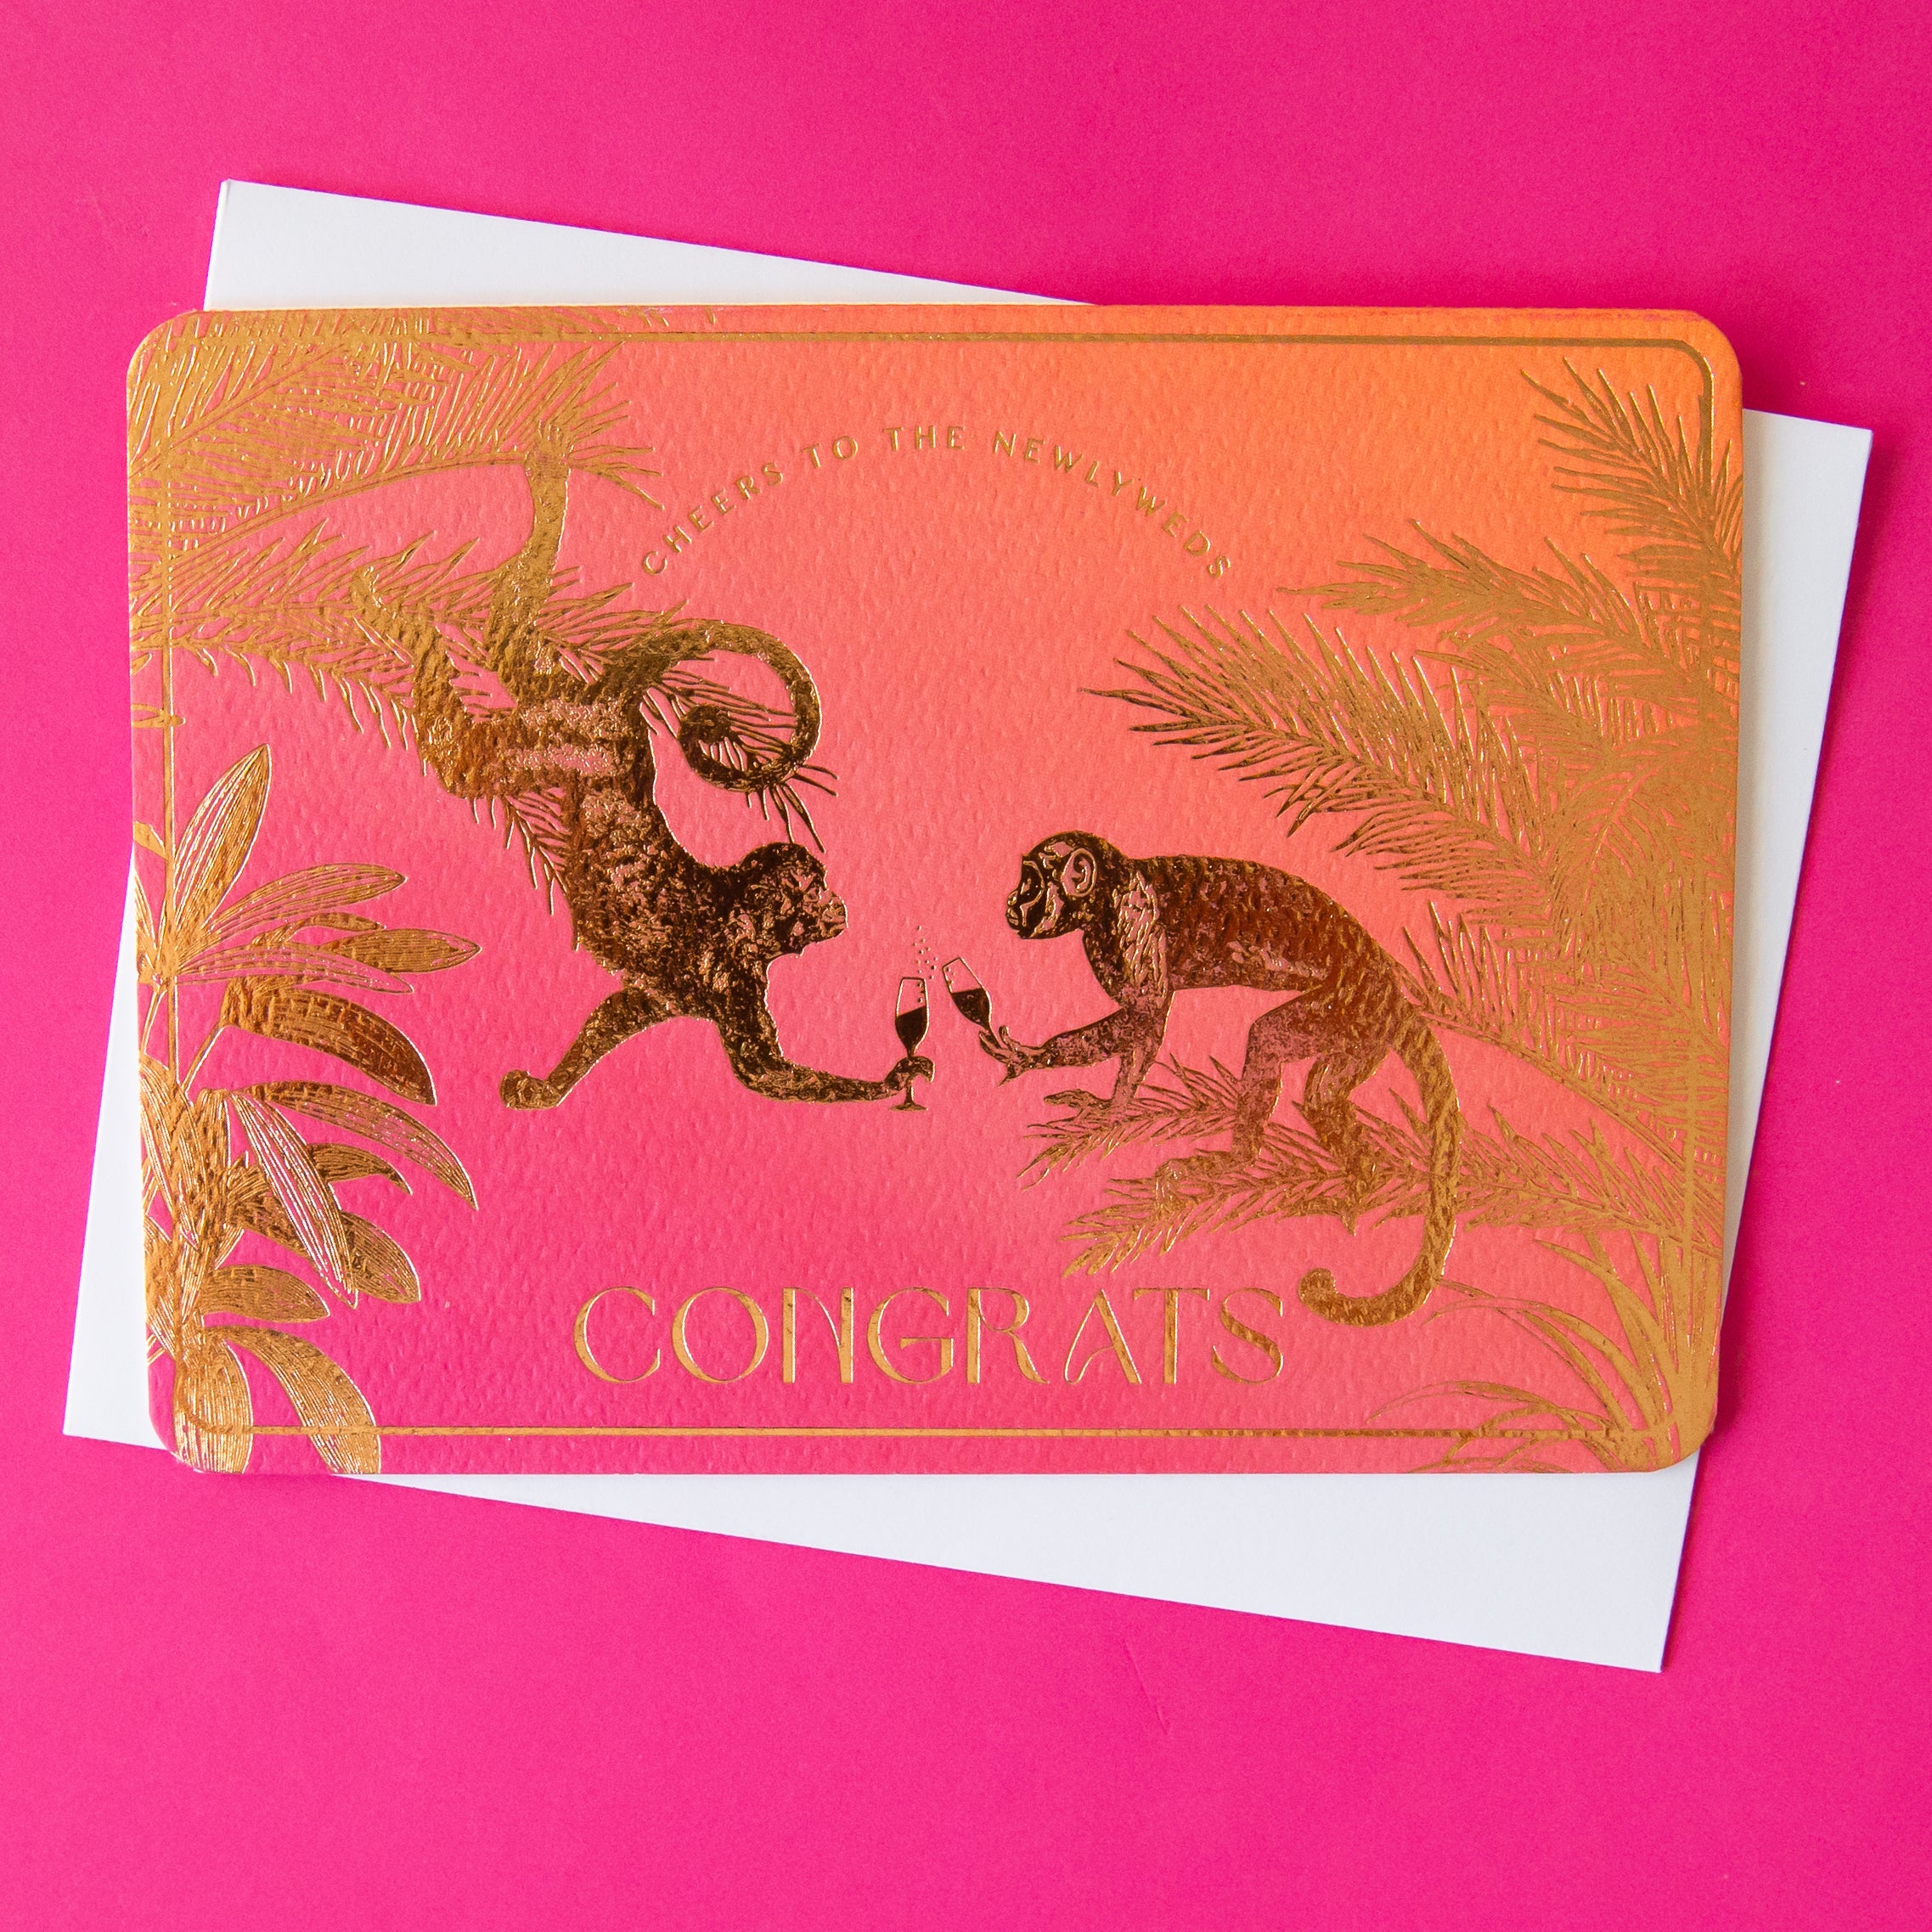 A pink and orange ombre card with gold foiled text and design of monkey's in jungle foliage cheersing champagne flutes and text that reads, "Cheers to the Newlyweds Congrats". 